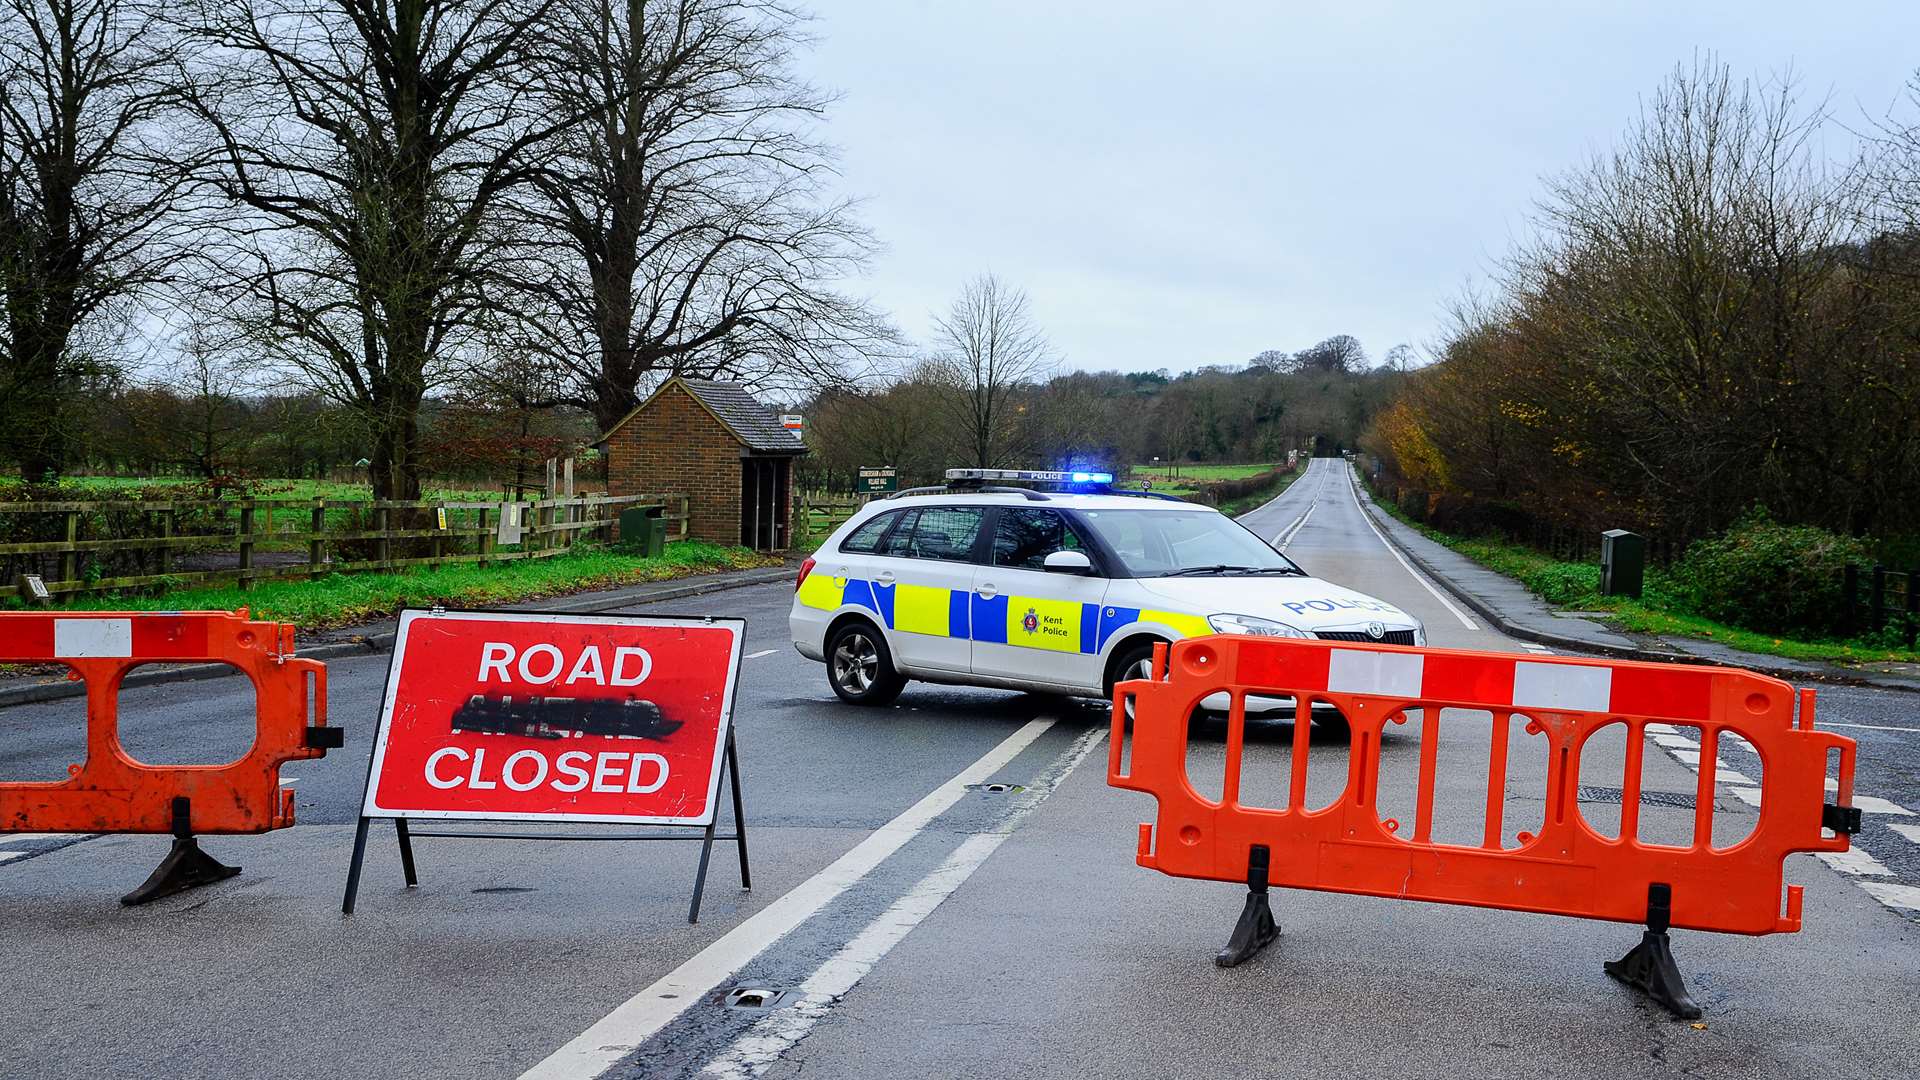 Part of the A28 was closed while a forensic examination was carried out and the debris was cleared